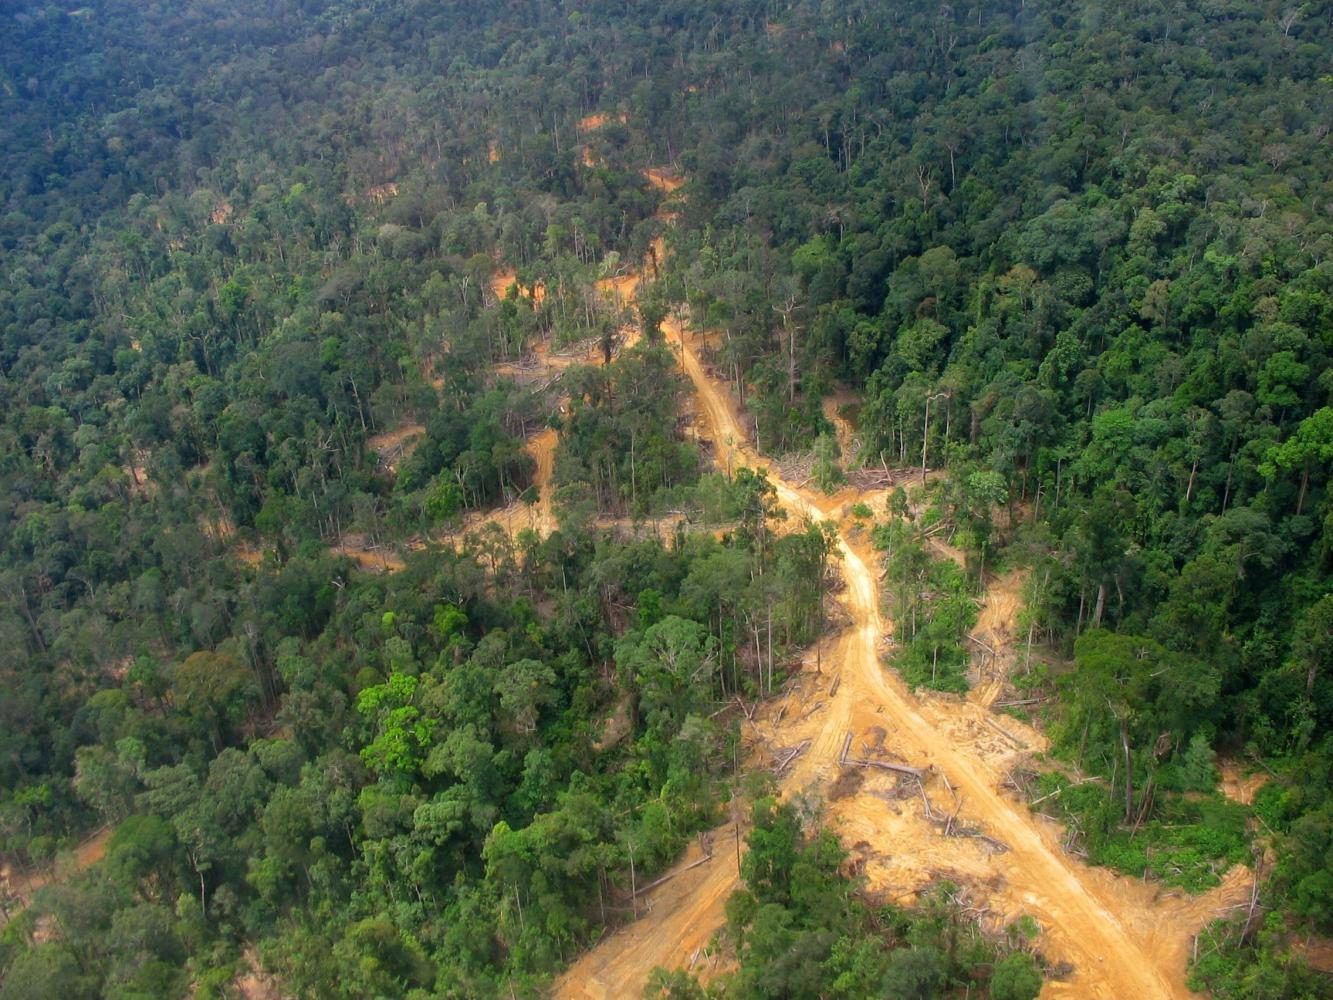 Running+through+the+Amazon+Rainforest%2C+illegal+logging+roads+are+used+to+transport+logs+that+benefit+the+lumber+industry.+Recent+agriculture+and+lumber+industry+activity+has+resulted+in+the+depletion+of+the+Amazon+Rainforest%2C+leaving+the+world+at+risk+for+climate+change.